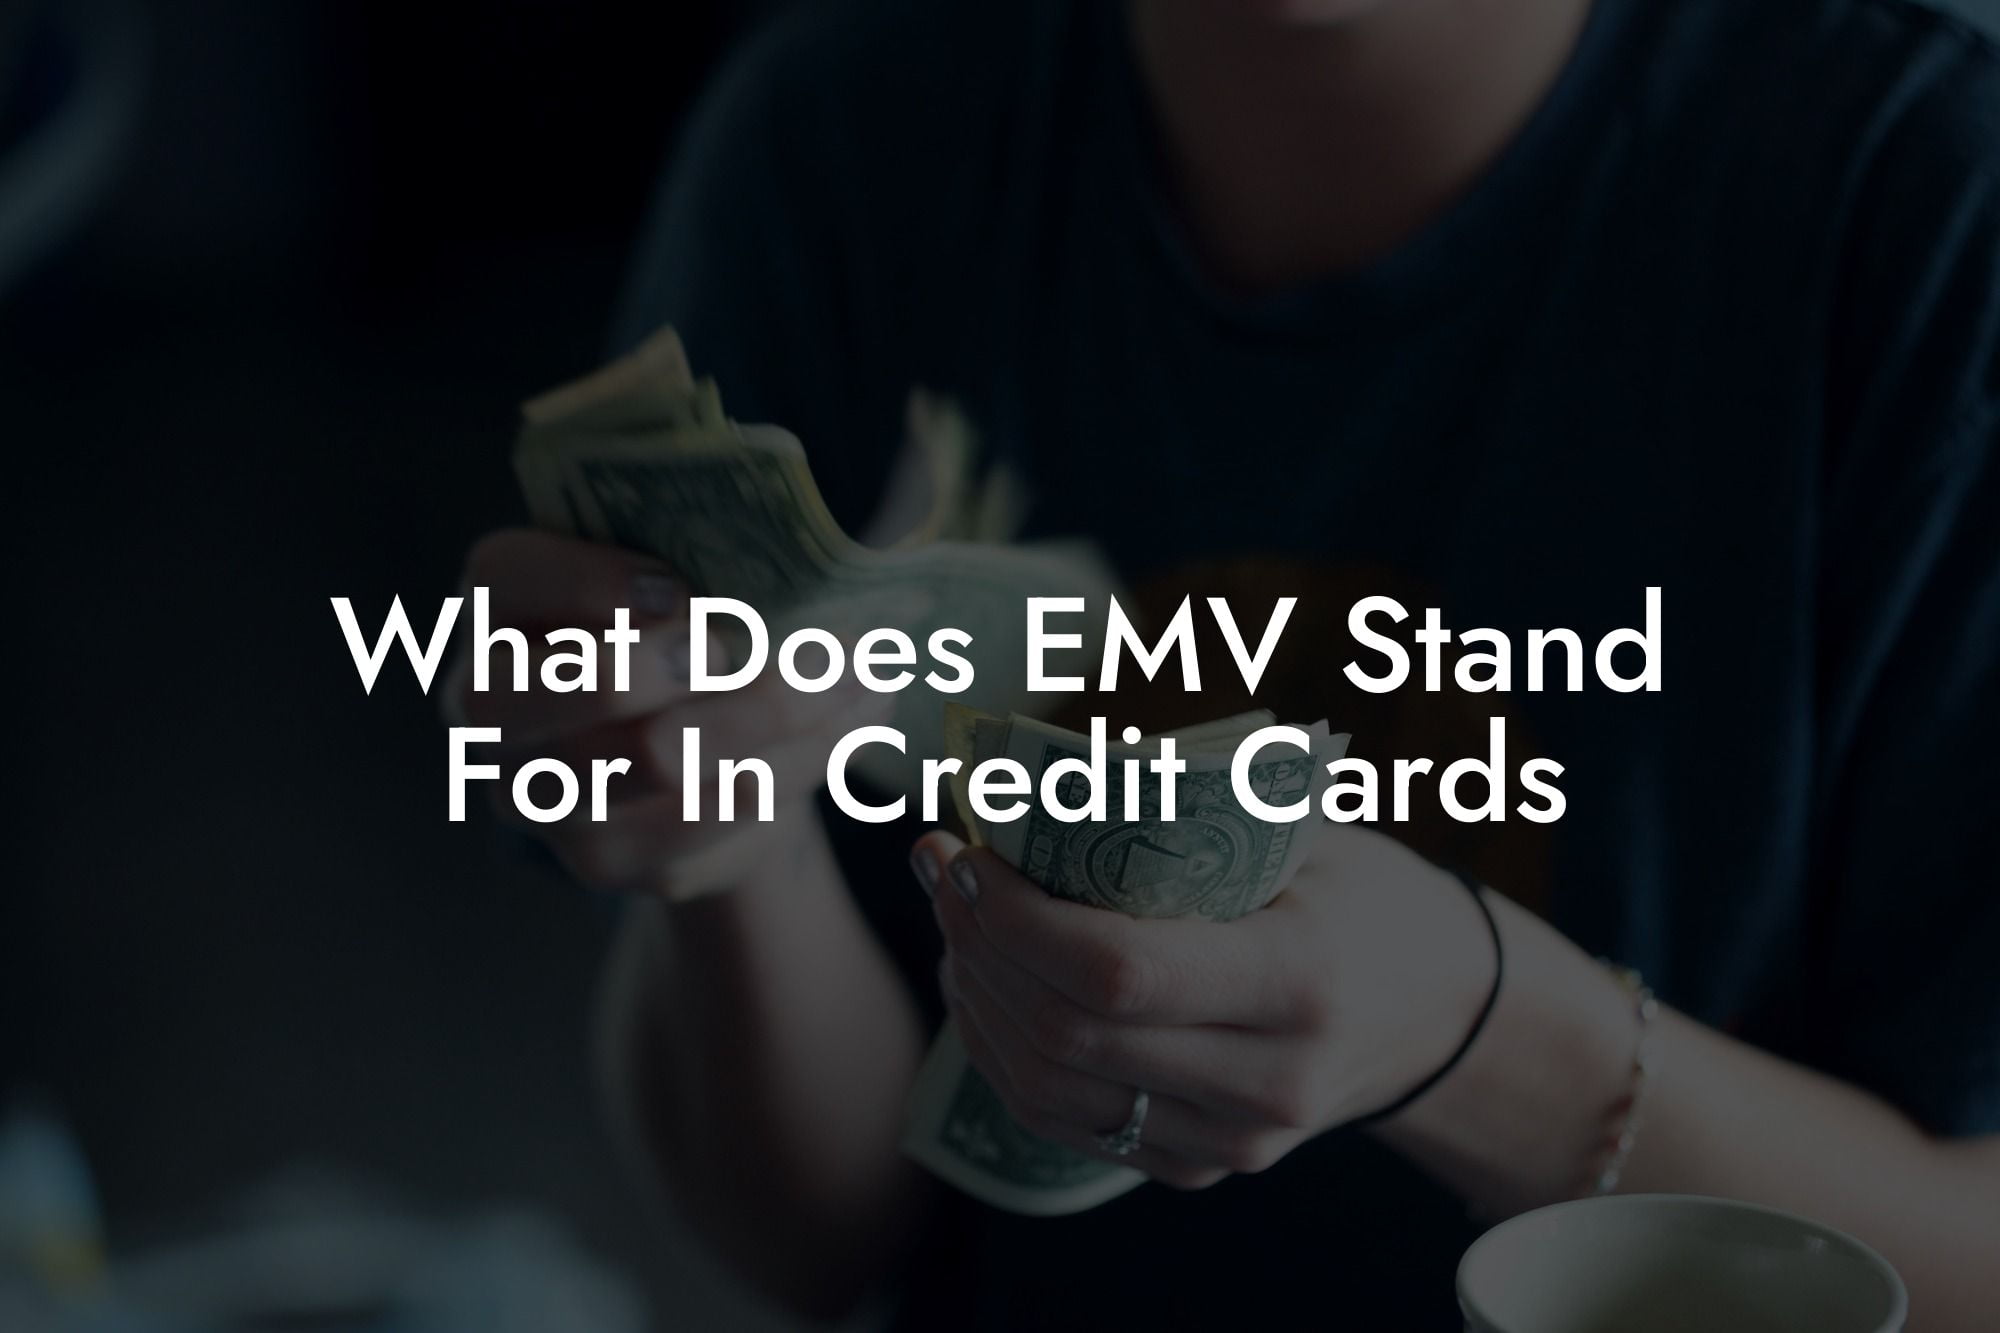 What Does EMV Stand For In Credit Cards